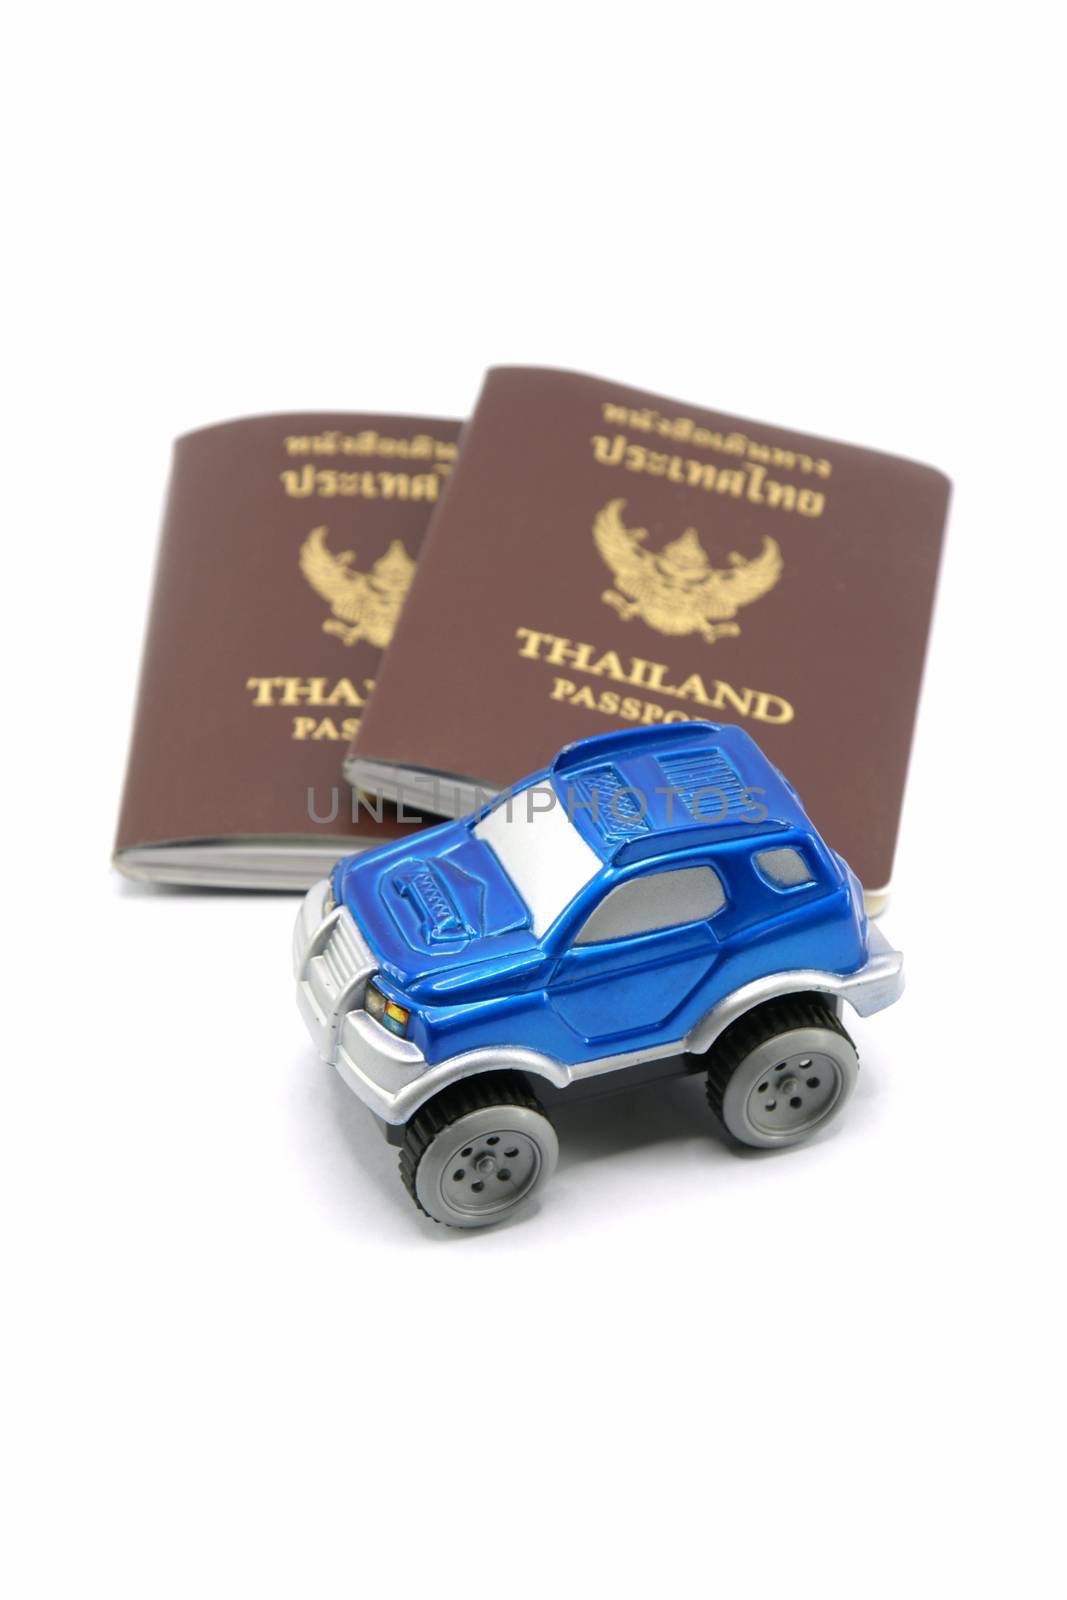 Thailand Passport and 4wd Car for Travel Concept.